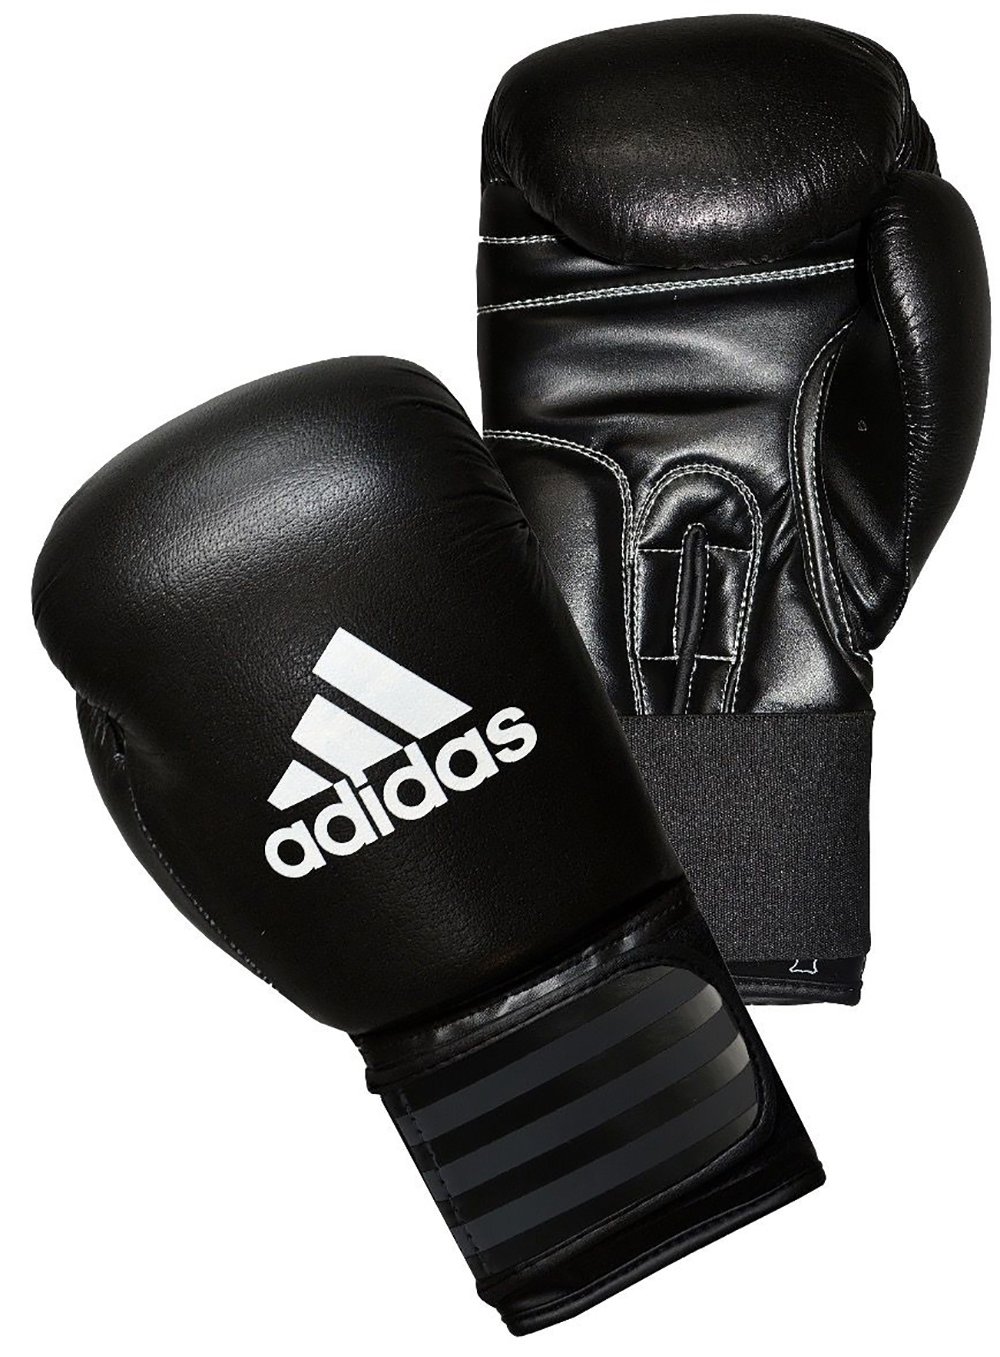 Adidas Performer 12oz Leather Boxing Gloves Black and White